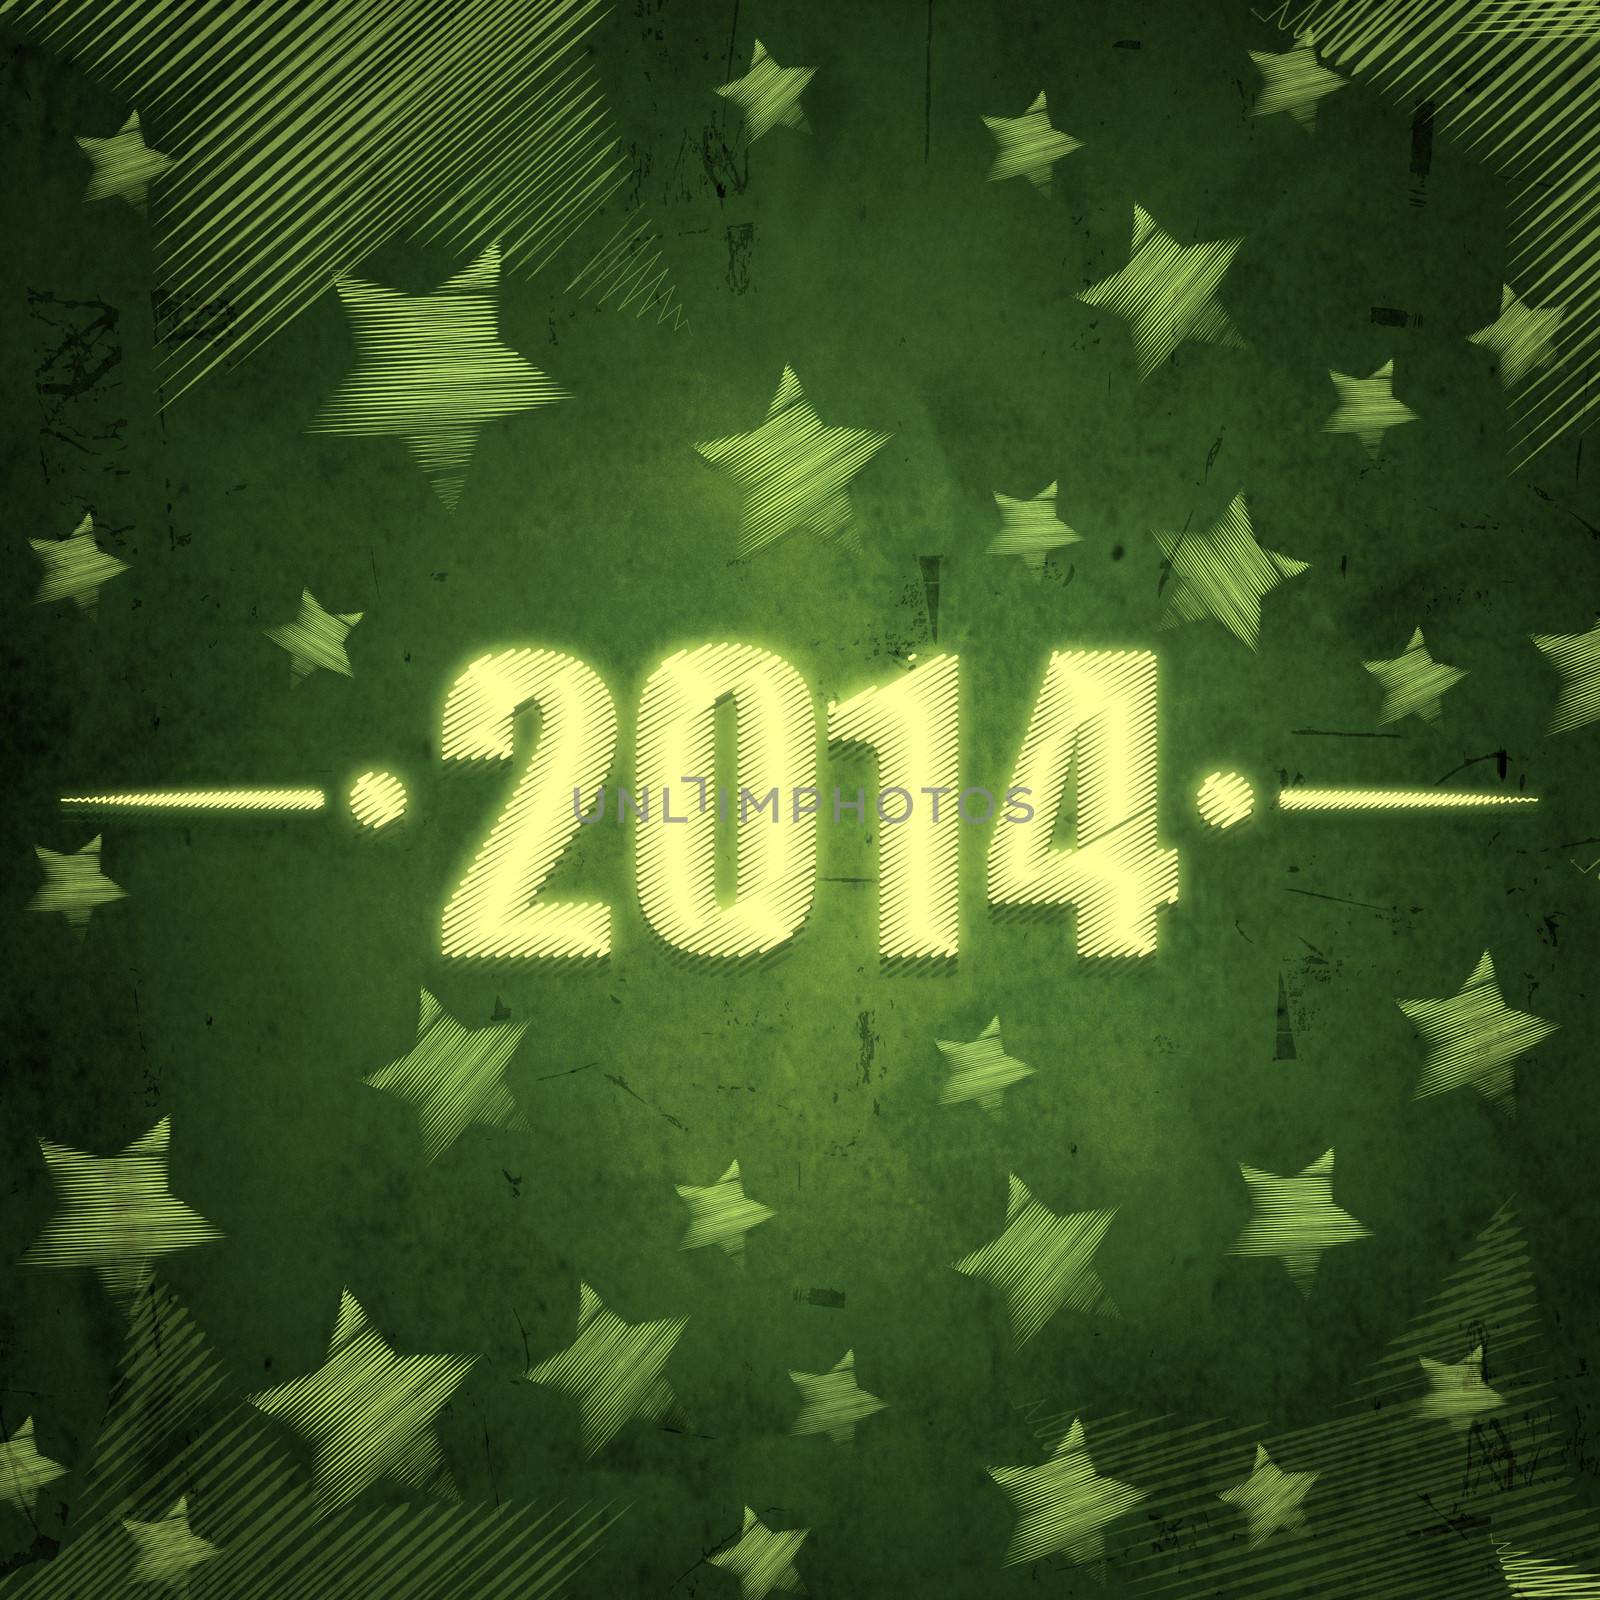 new year 2014, abstract green background with figures and illustrated striped stars, retro style holiday card